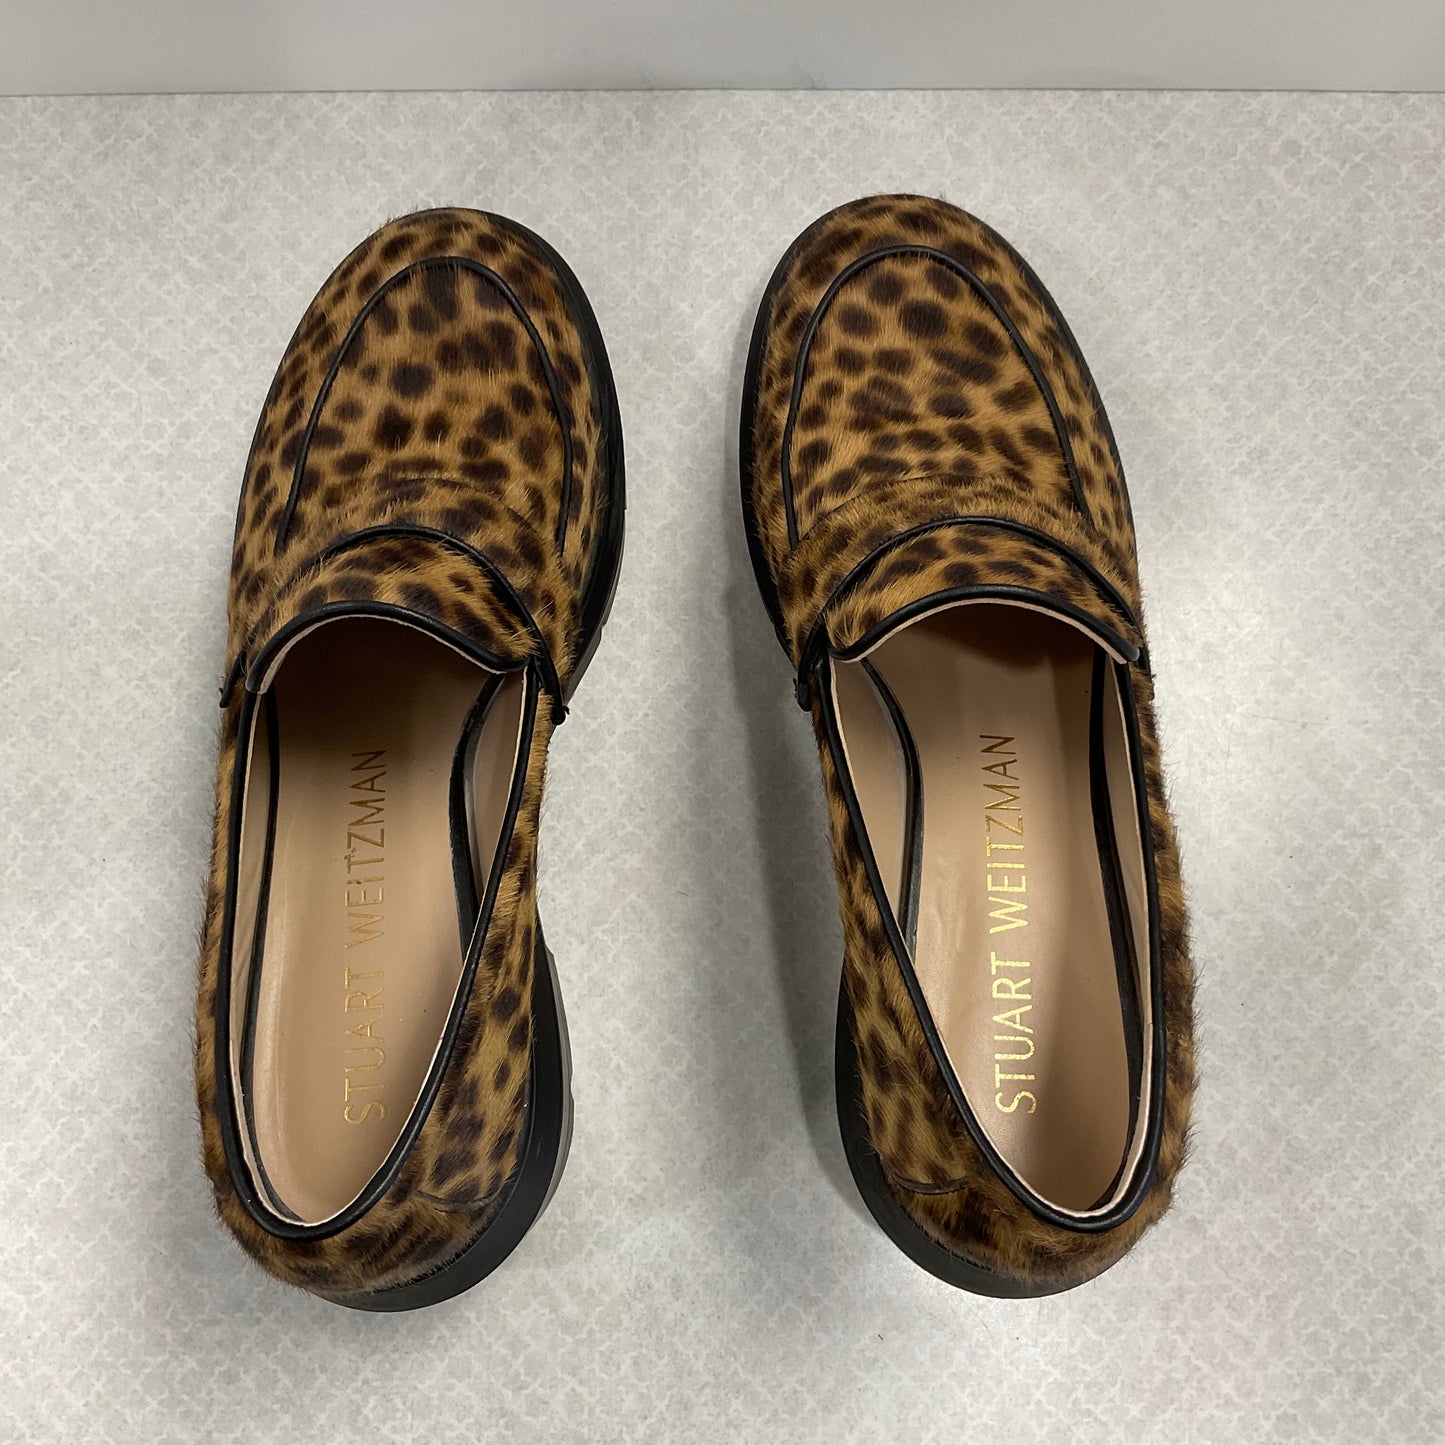 Shoes Heels Loafer Oxford By Stuart Weitzman  Size: 10